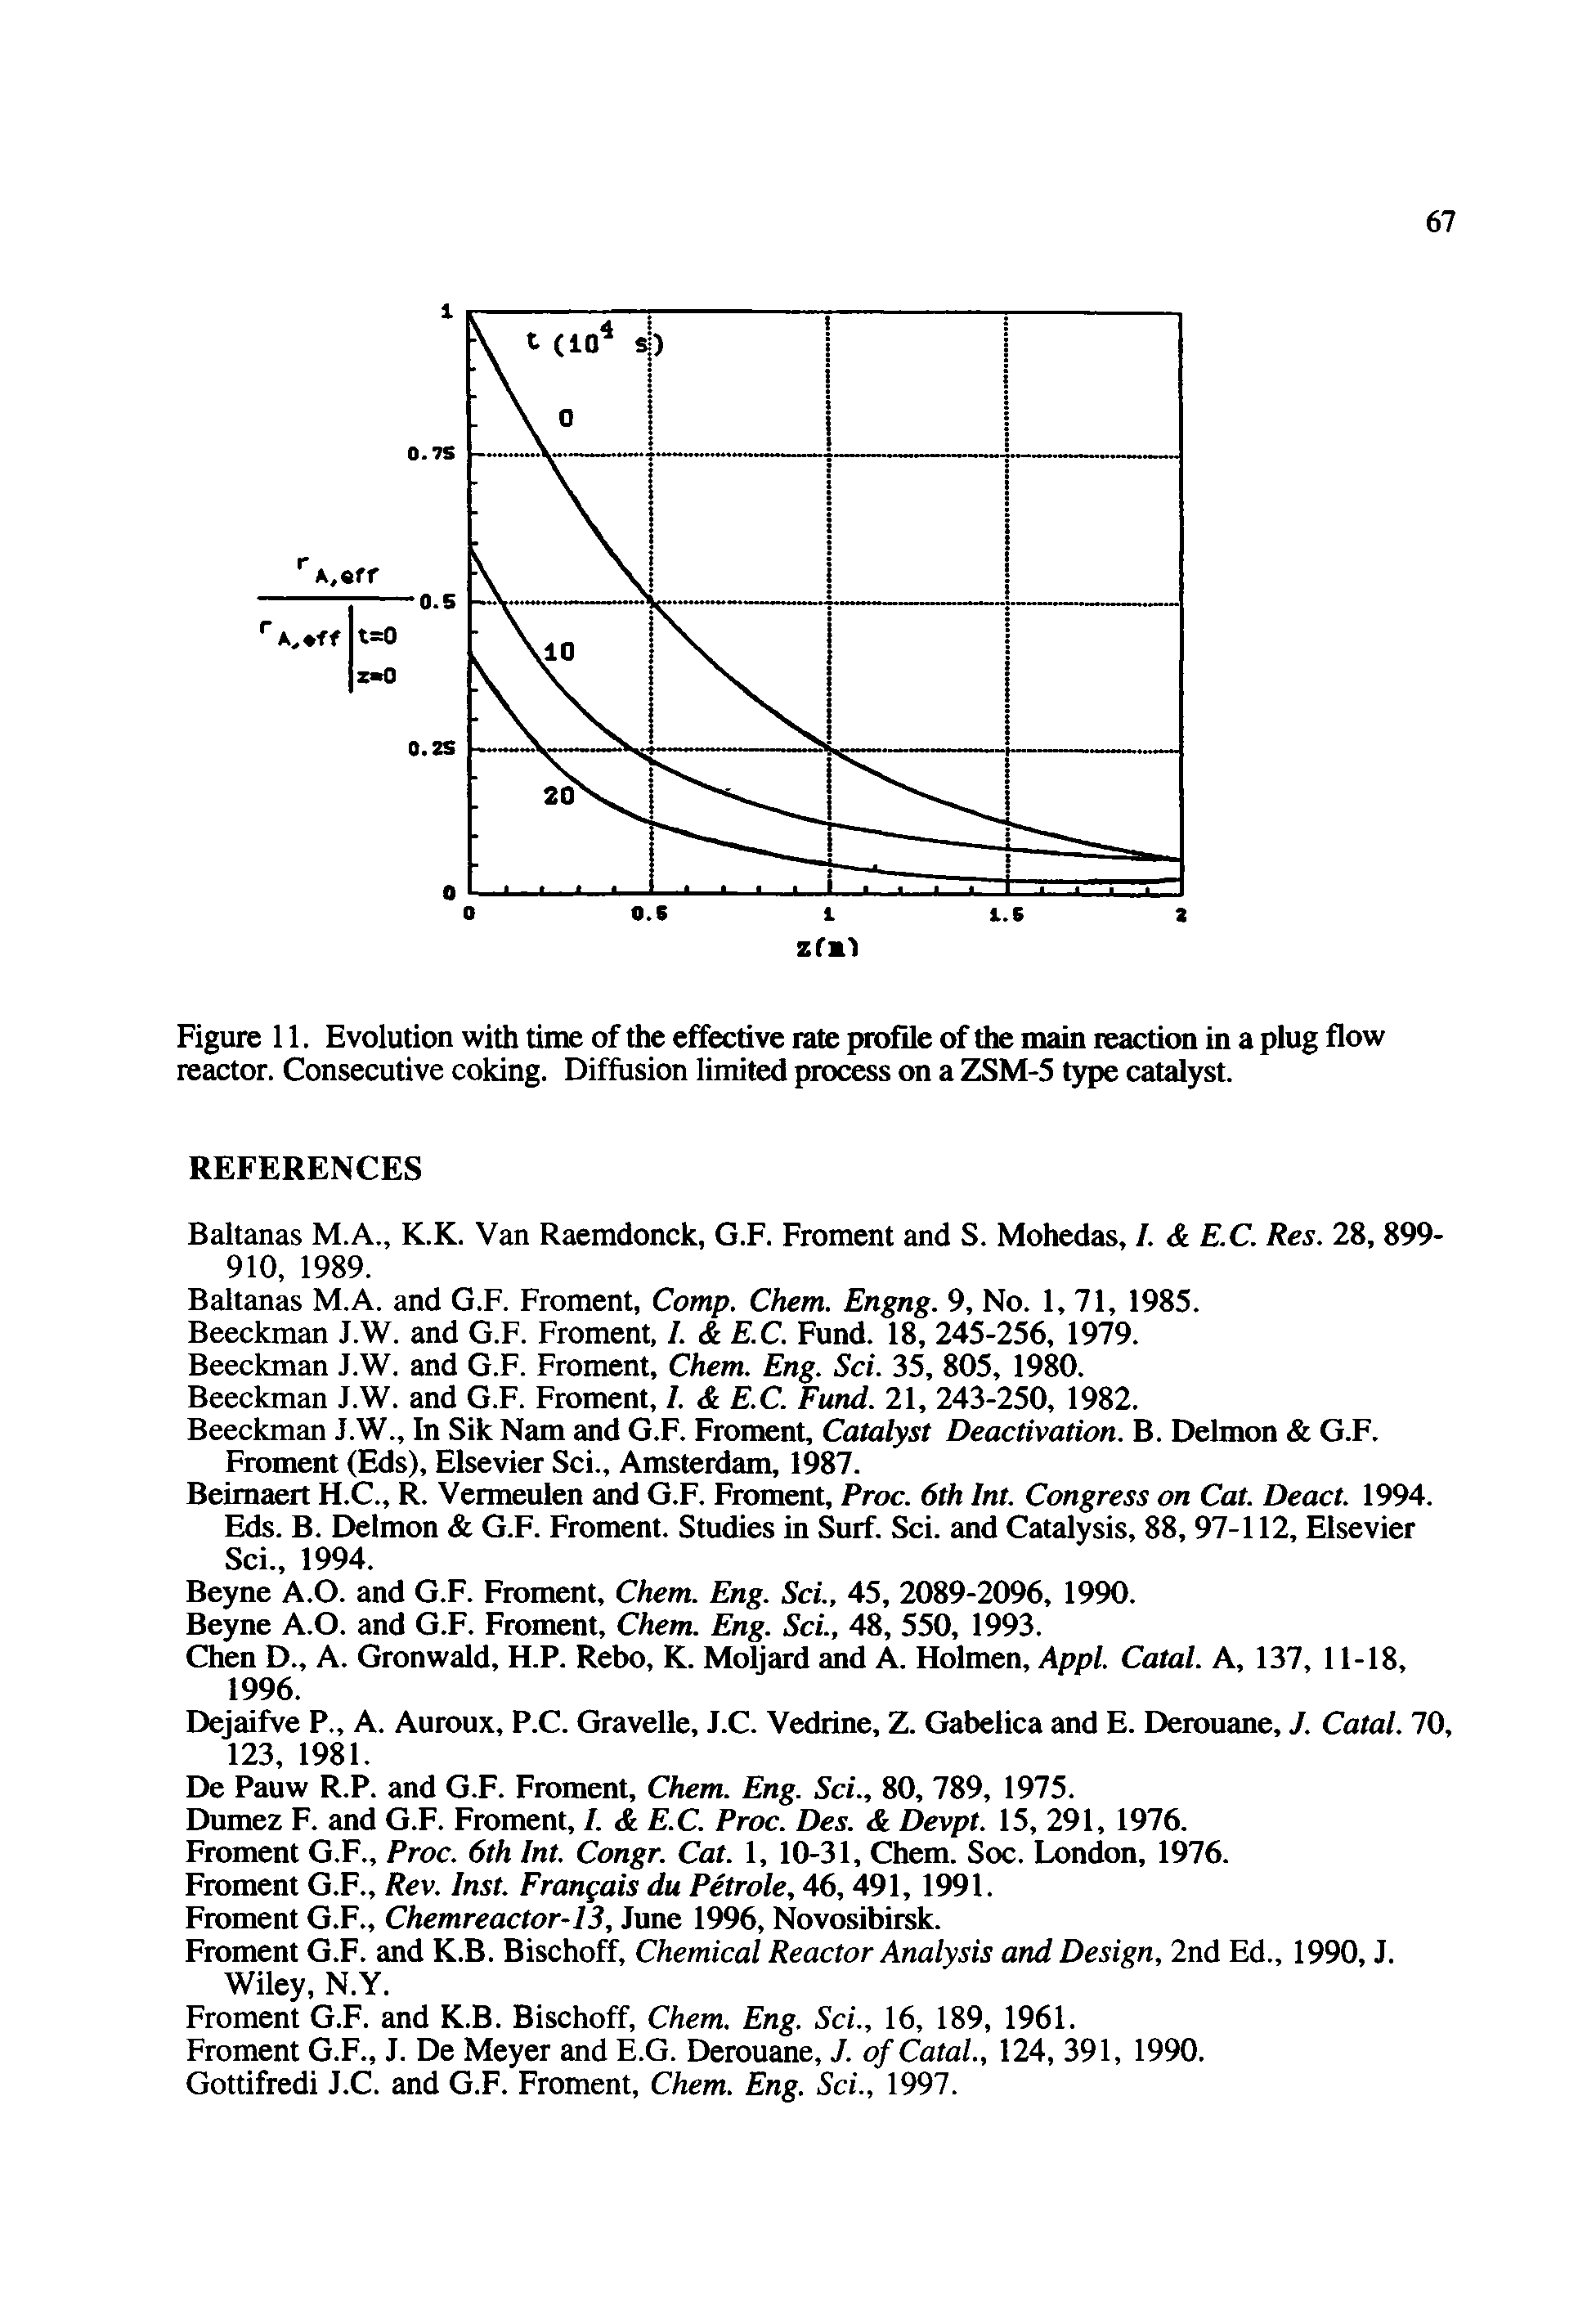 Figure 11. Evolution with time of the effective rate profile of the main reaction in a plug flow reactor. Consecutive coking. Diffusion limited process on a ZSM-5 type catalyst.